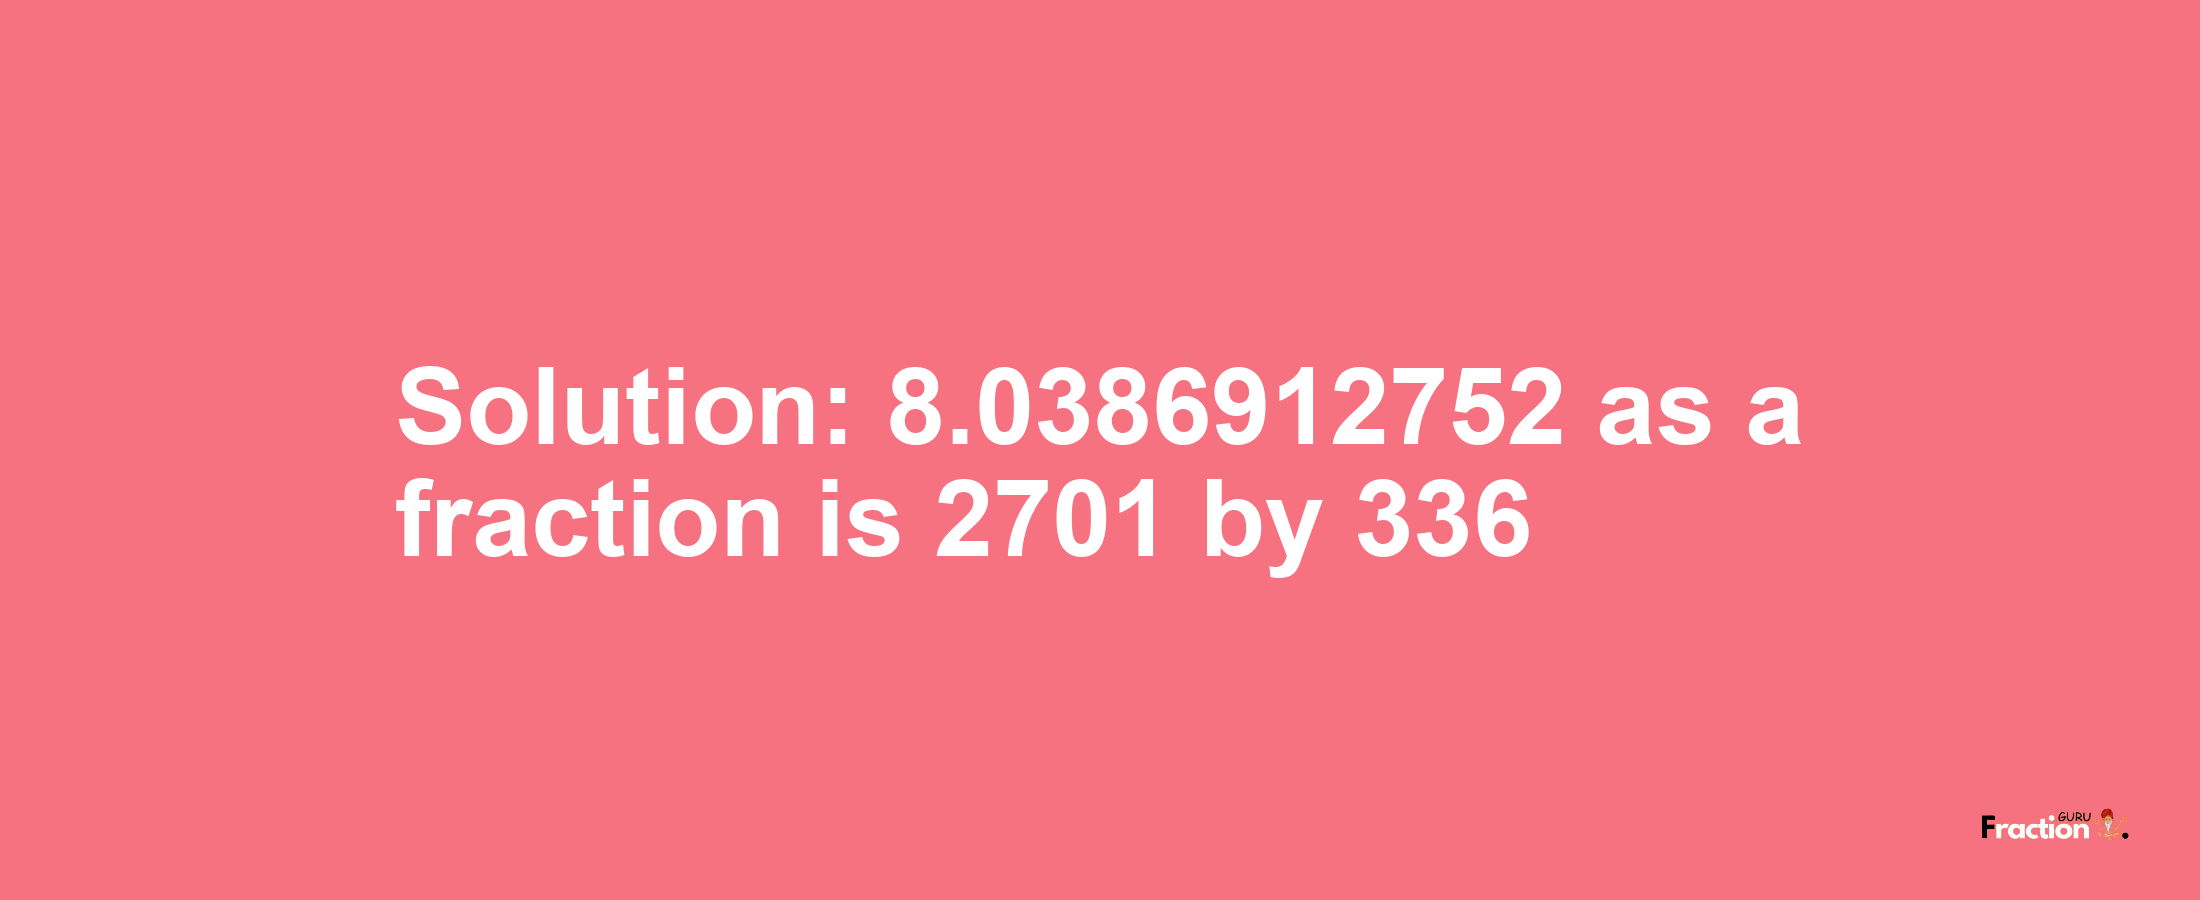 Solution:8.0386912752 as a fraction is 2701/336